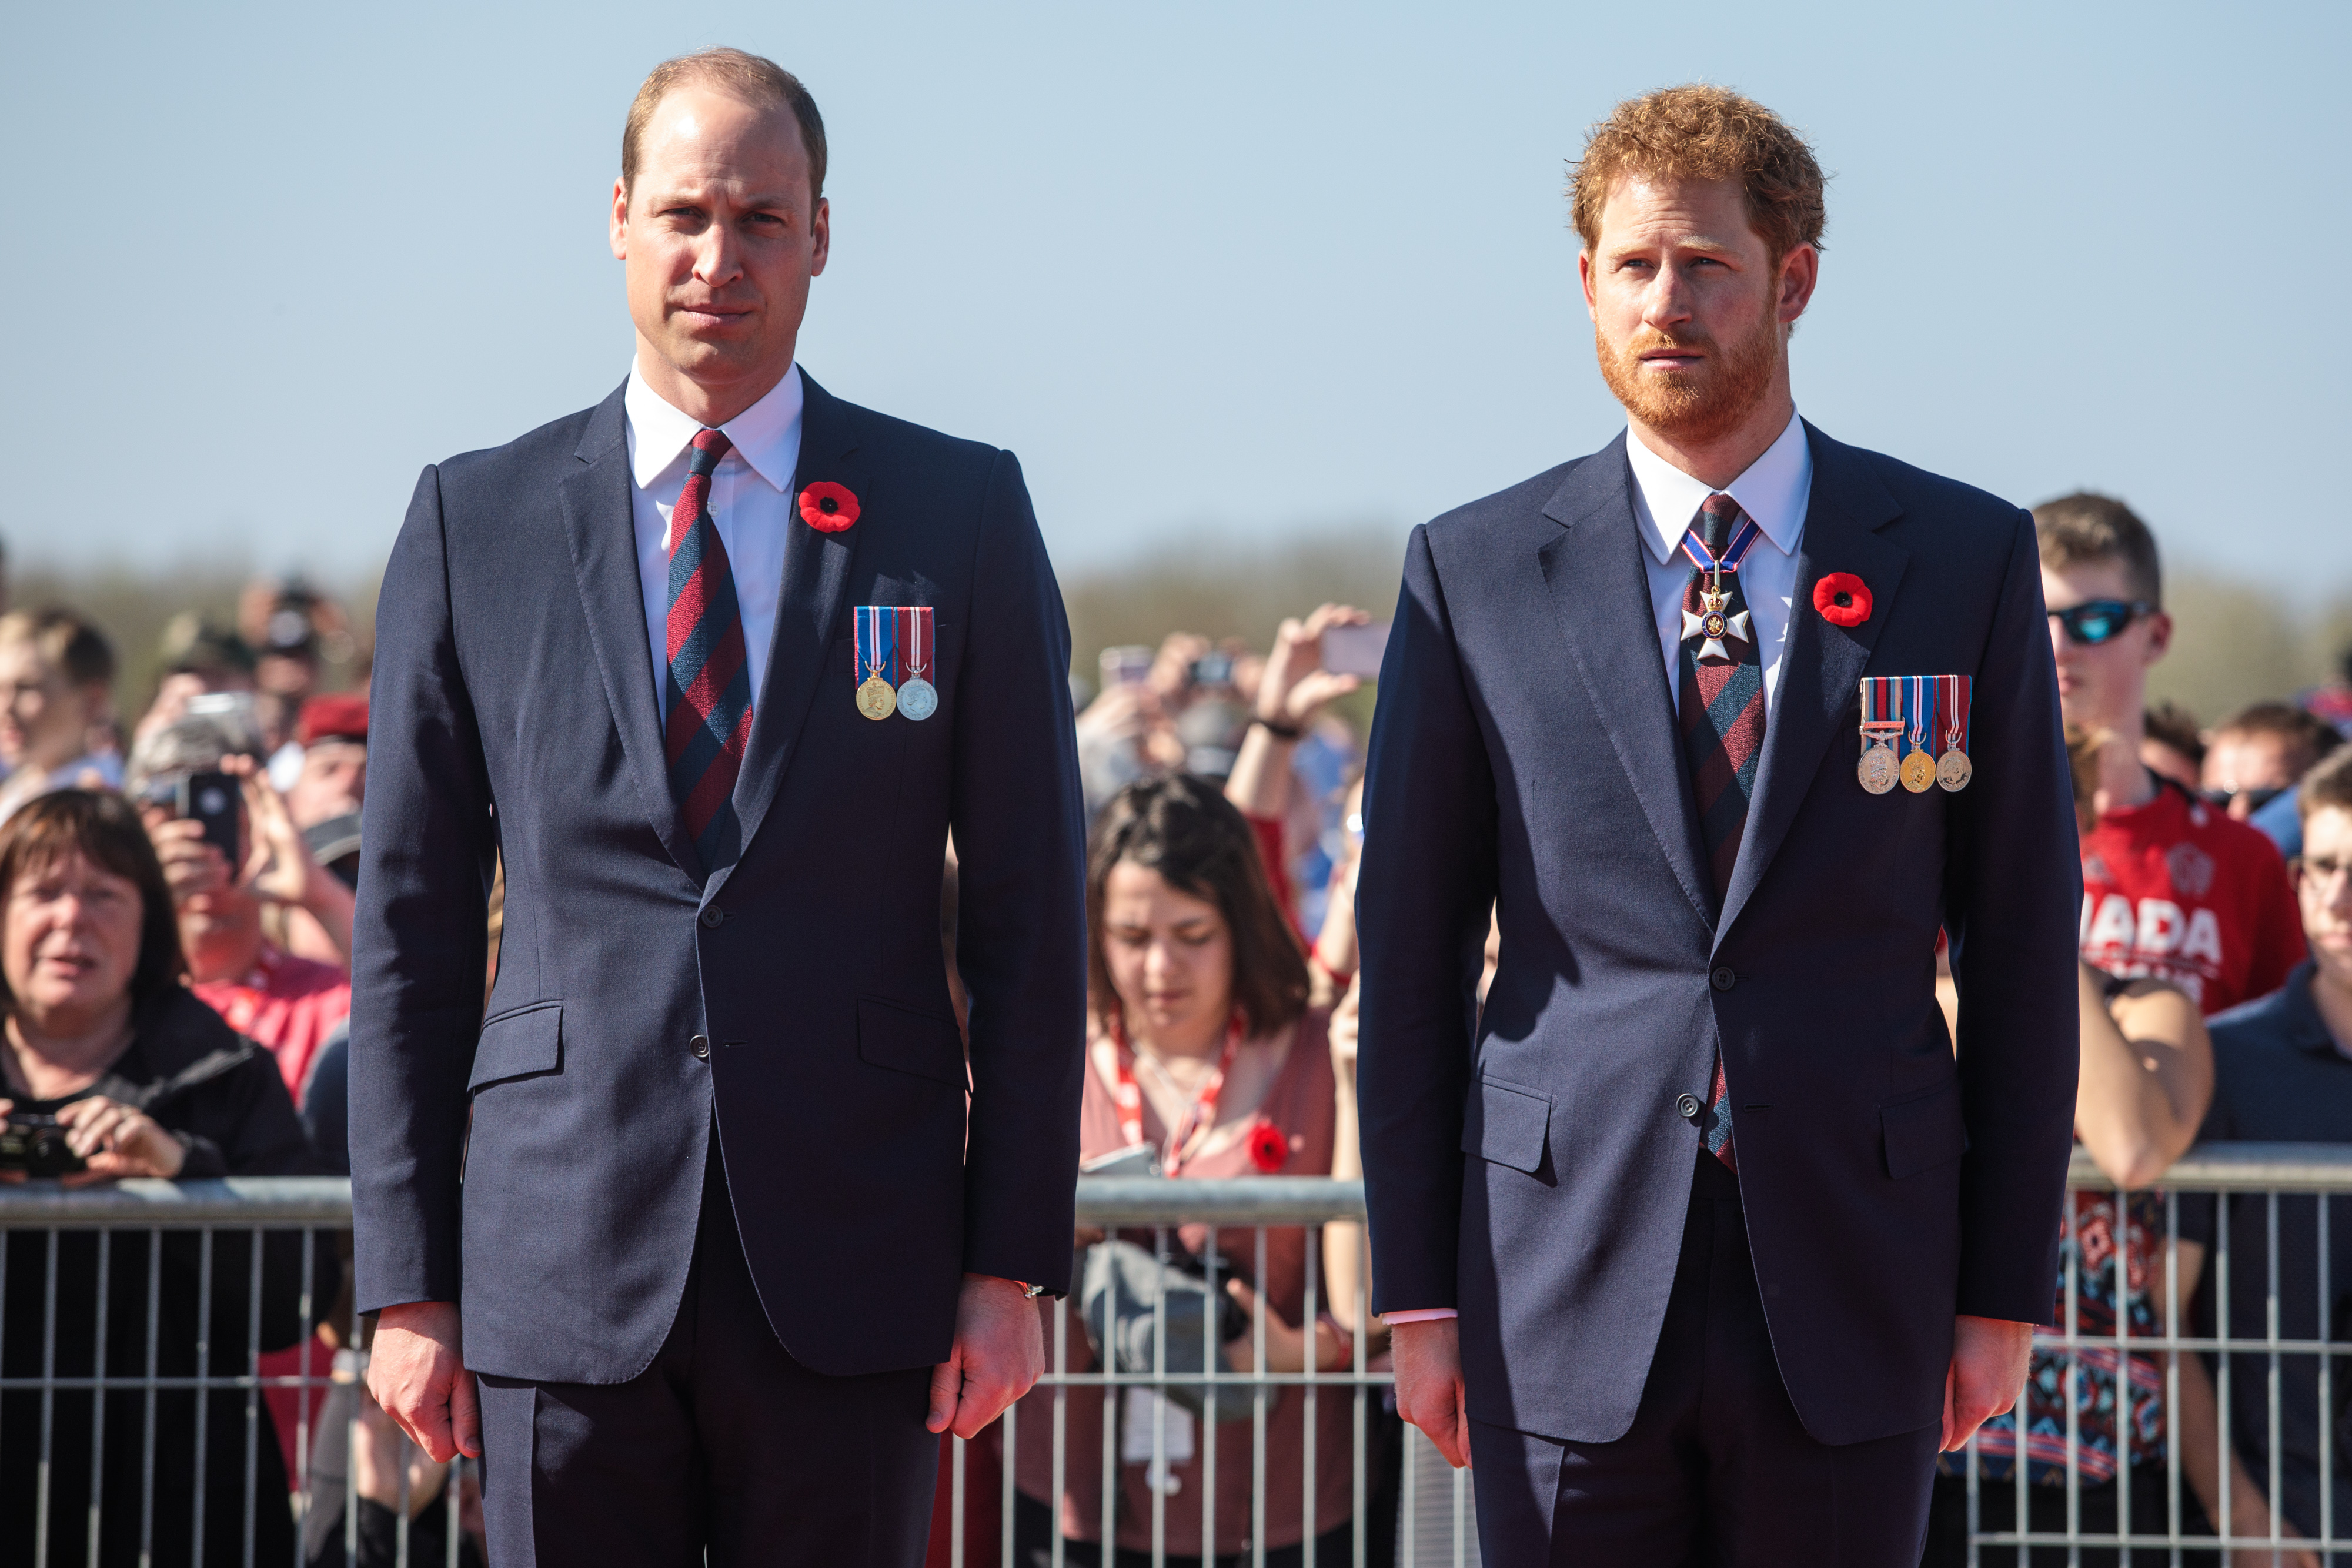 Prince William and Prince Harry arrive at the Canadian National Vimy Memorial on April 9, 2017 in Vimy, France. | Source: Getty Images